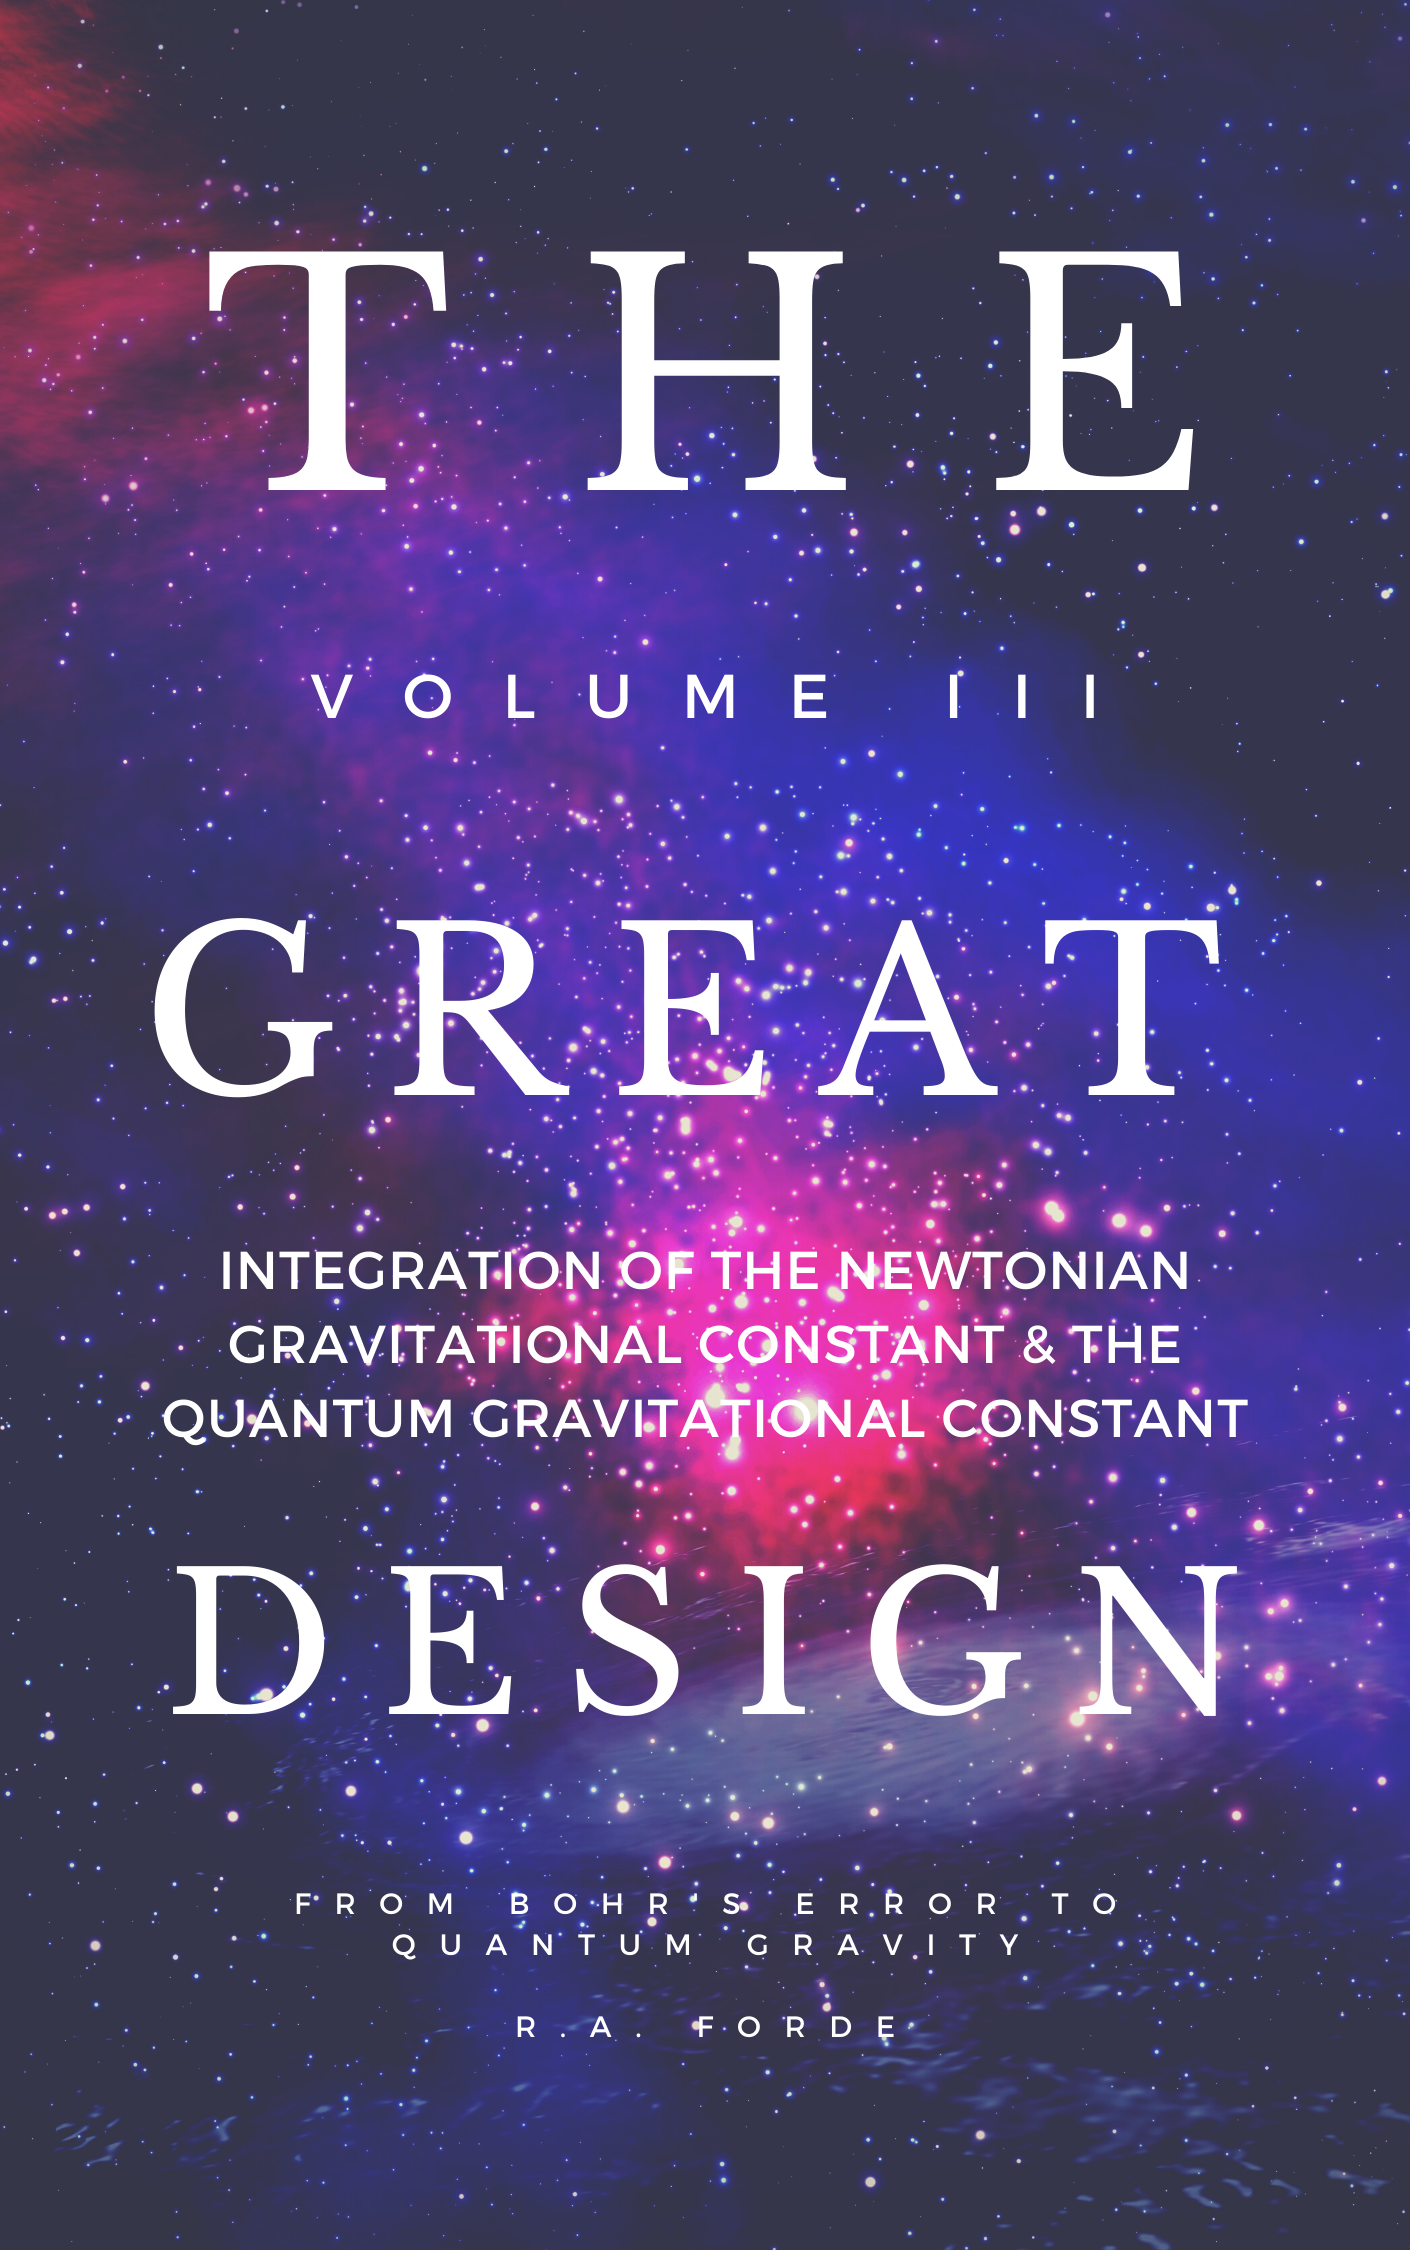 The Great Design Cover - Volume 3